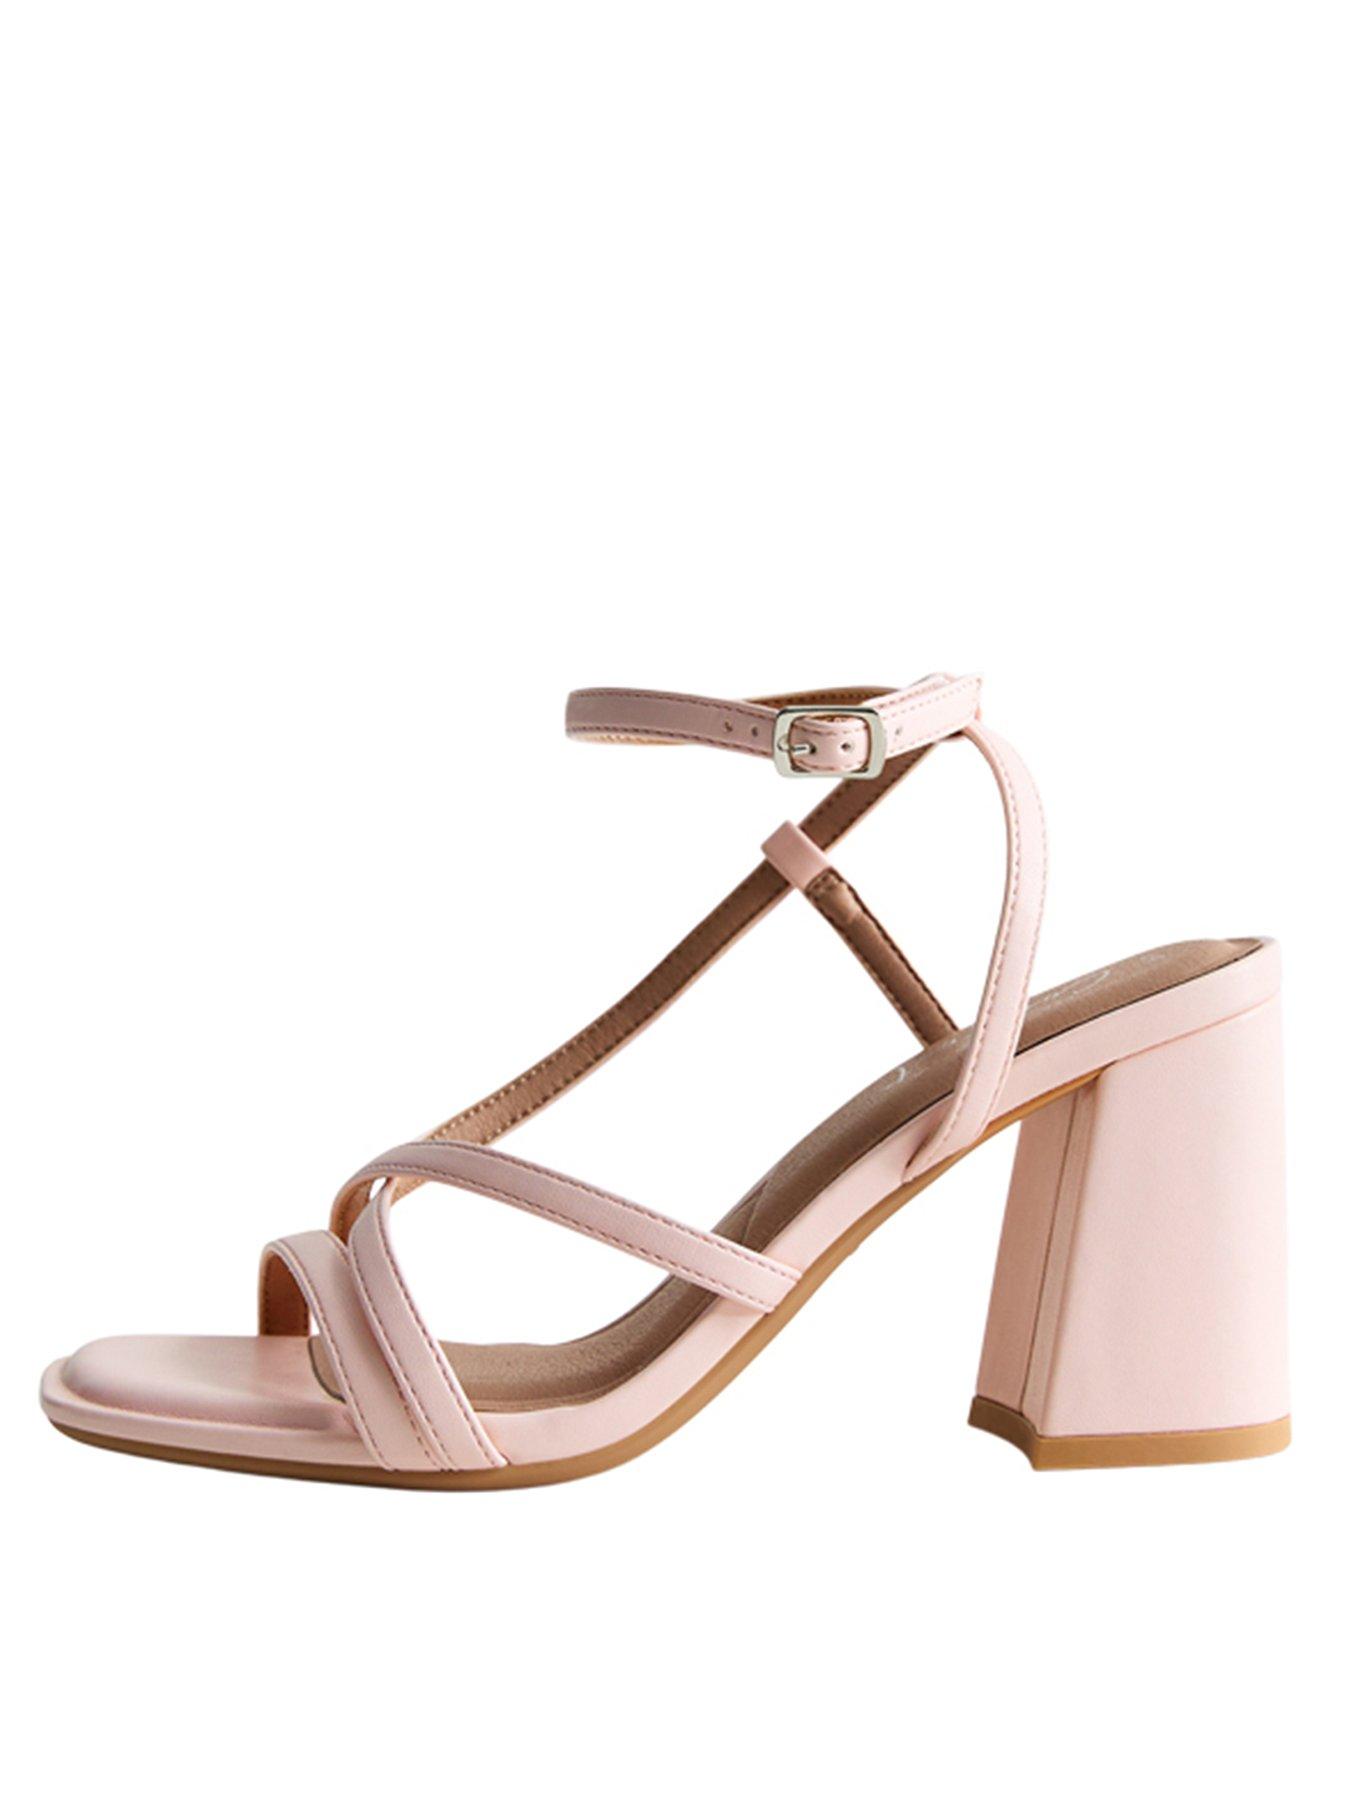 New Look strappy sandal with block heel in pink | ASOS